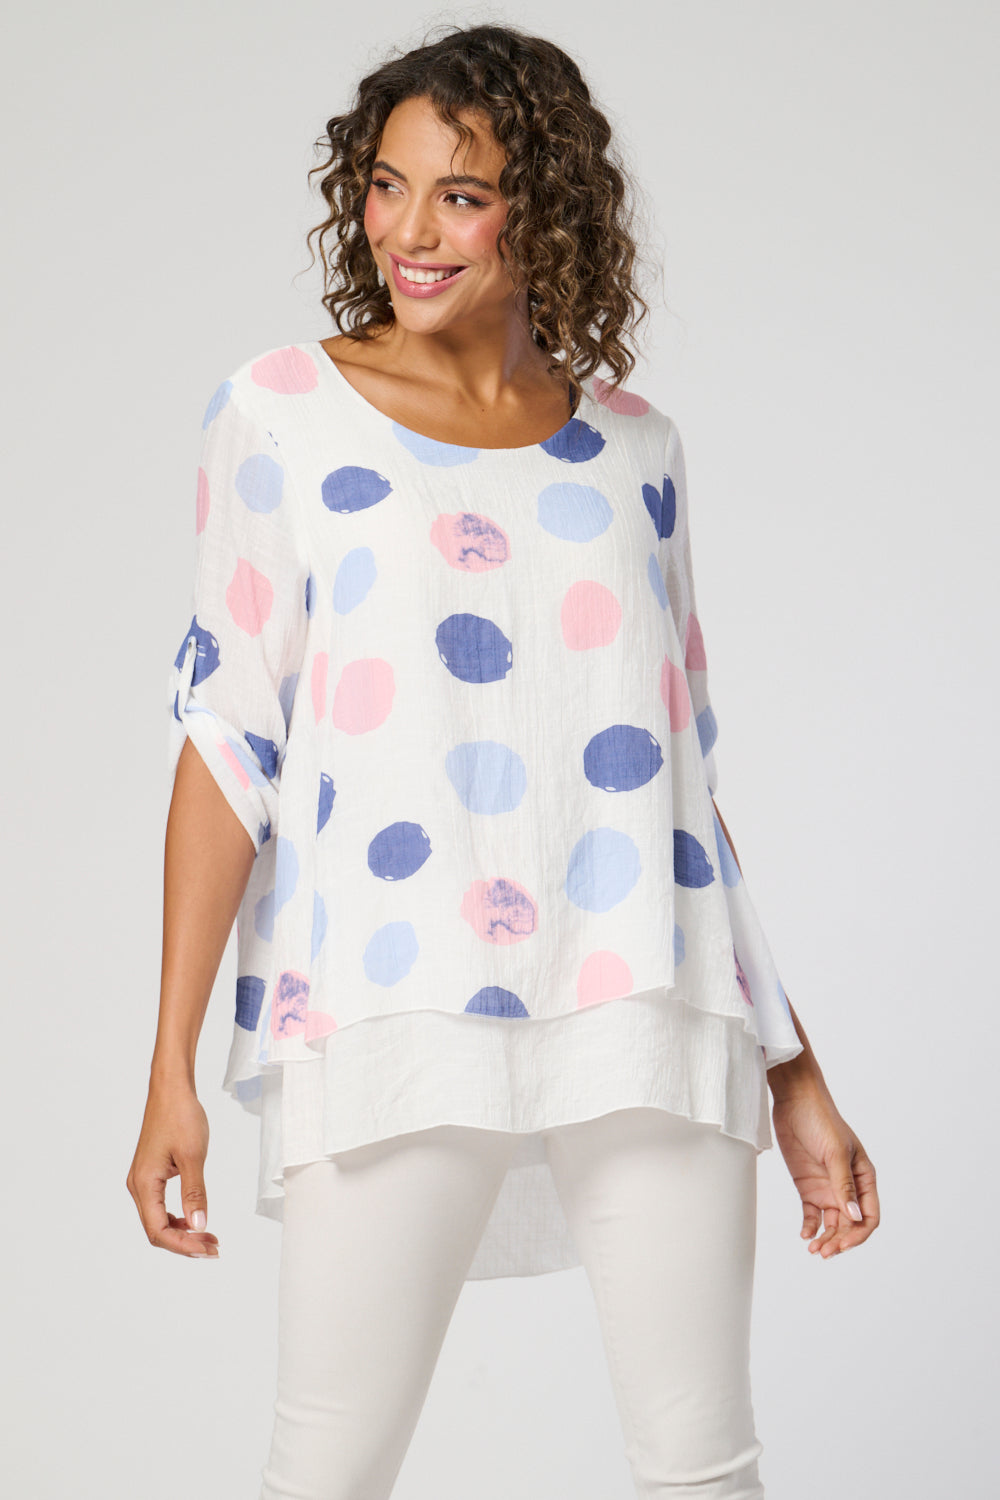 Saloos Split Back Double Layer Top with Necklace